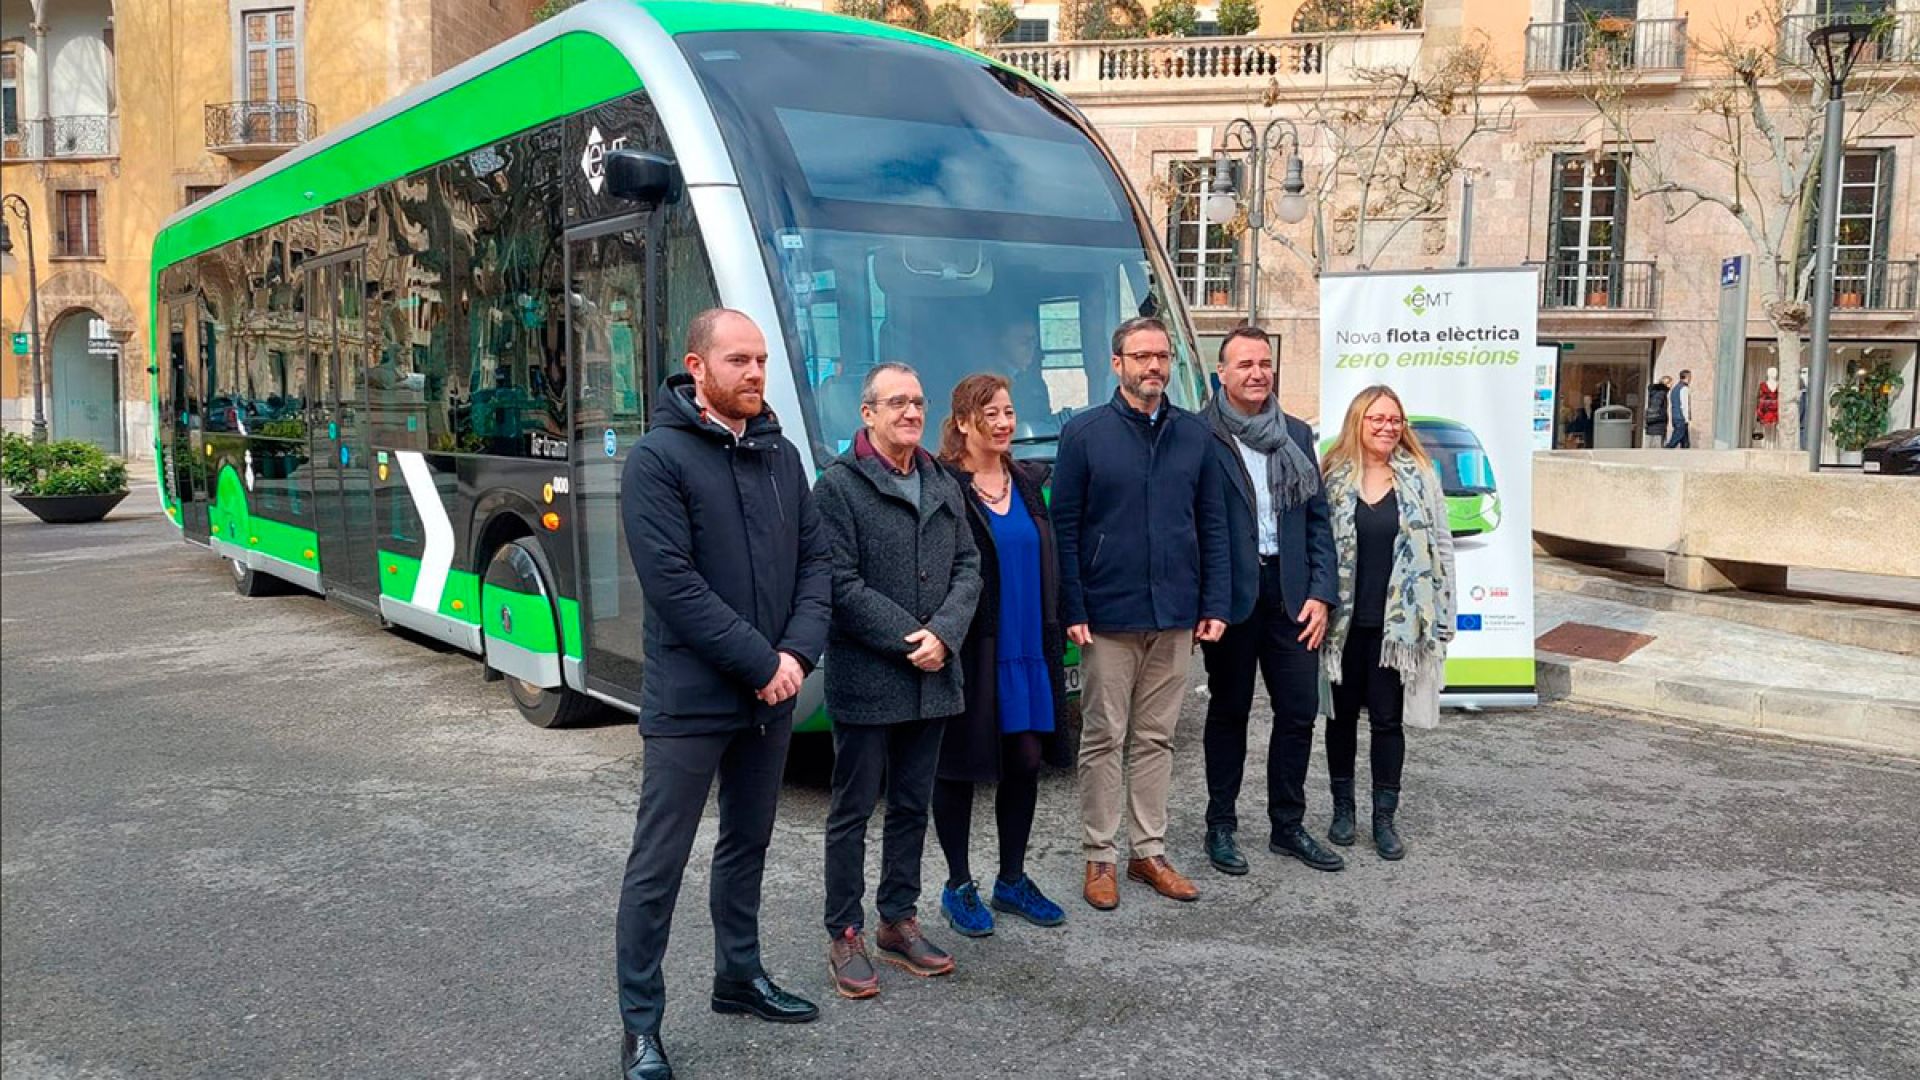 This 12-metre long Irizar ie tram will be integrated into the EMT Palma fleet network in a test period